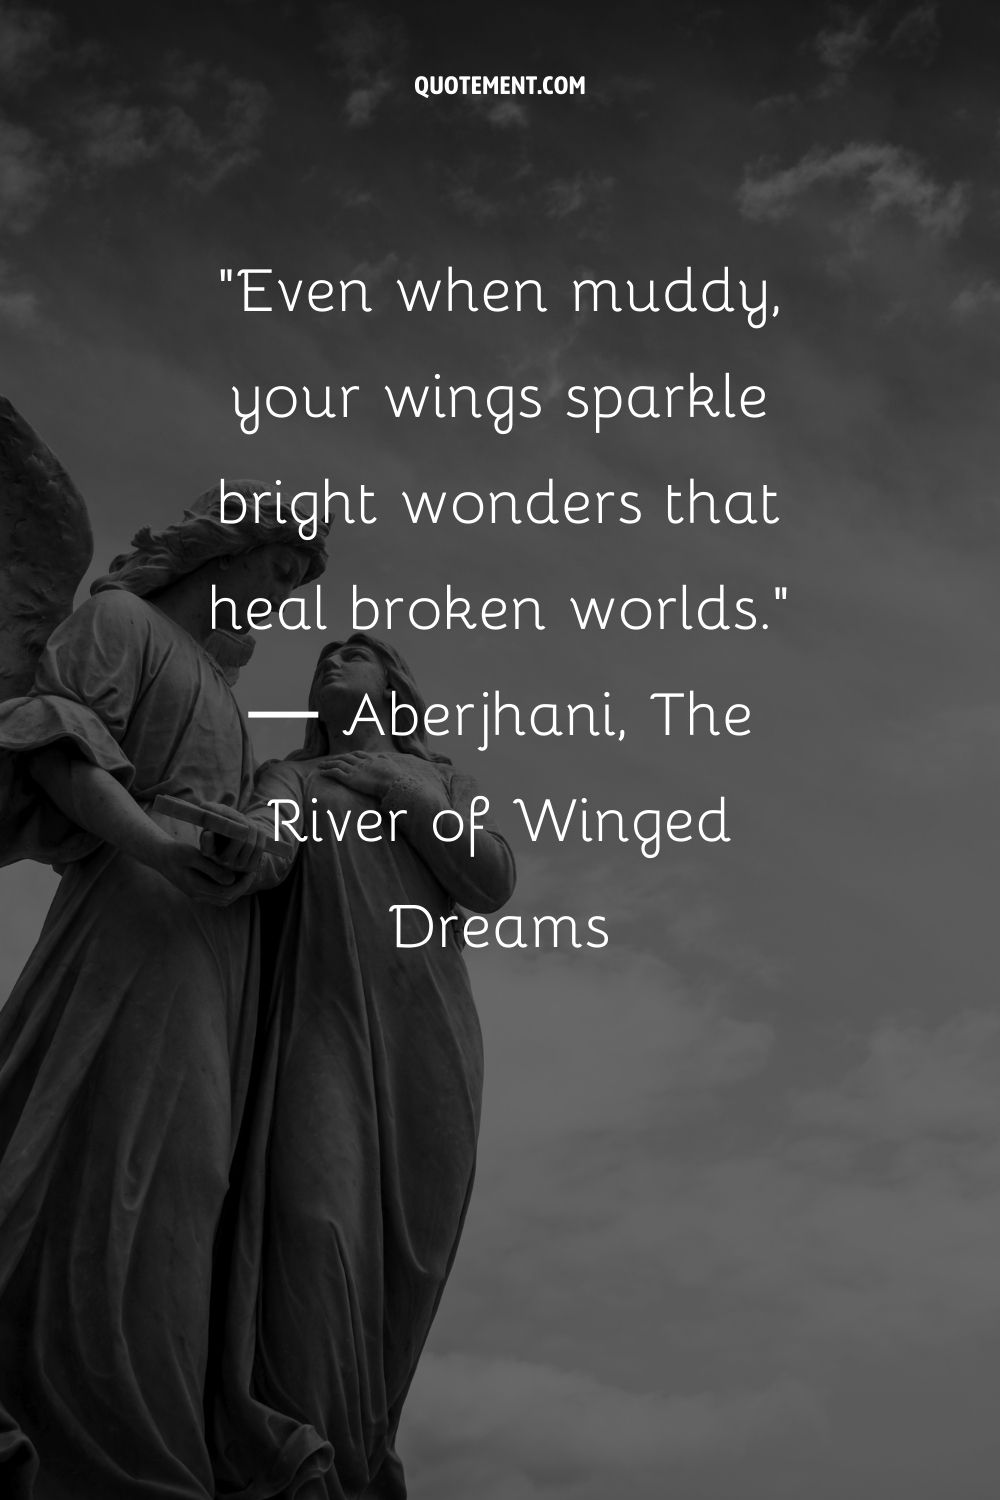 Even when muddy, your wings sparkle bright wonders that heal broken worlds.